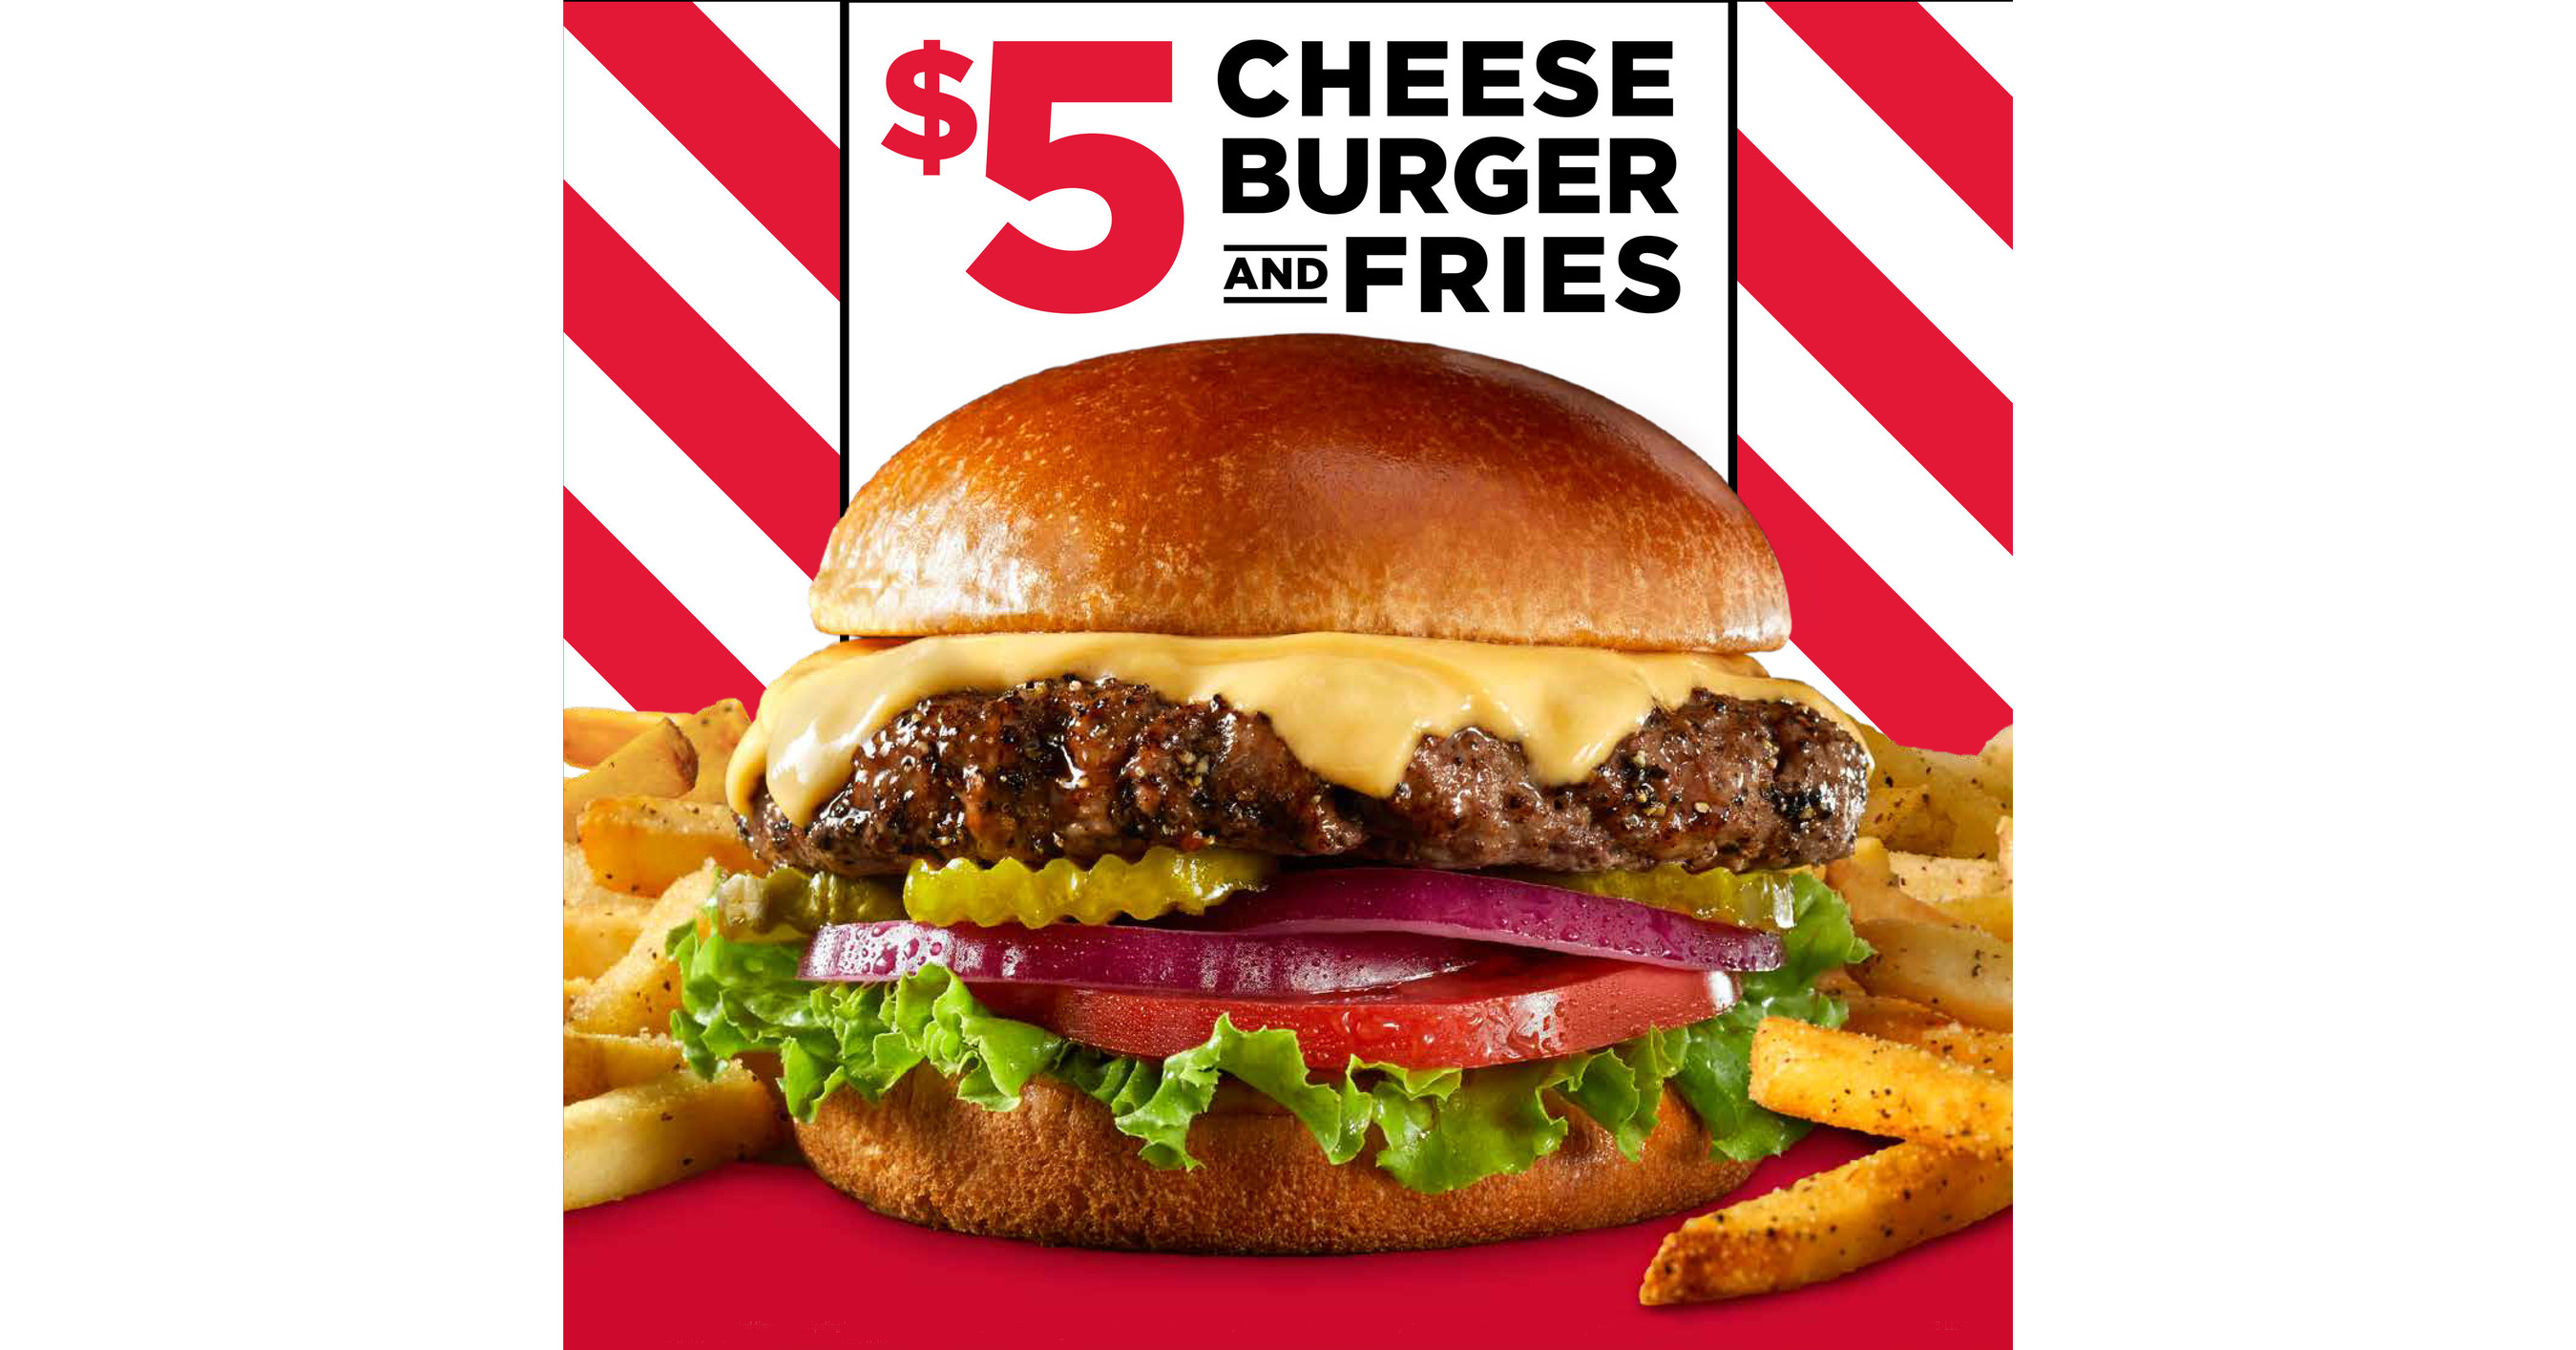 Tgi Fridays™ Makes Every Day Cheeseburger Day With 5 Cheeseburgers And Fries